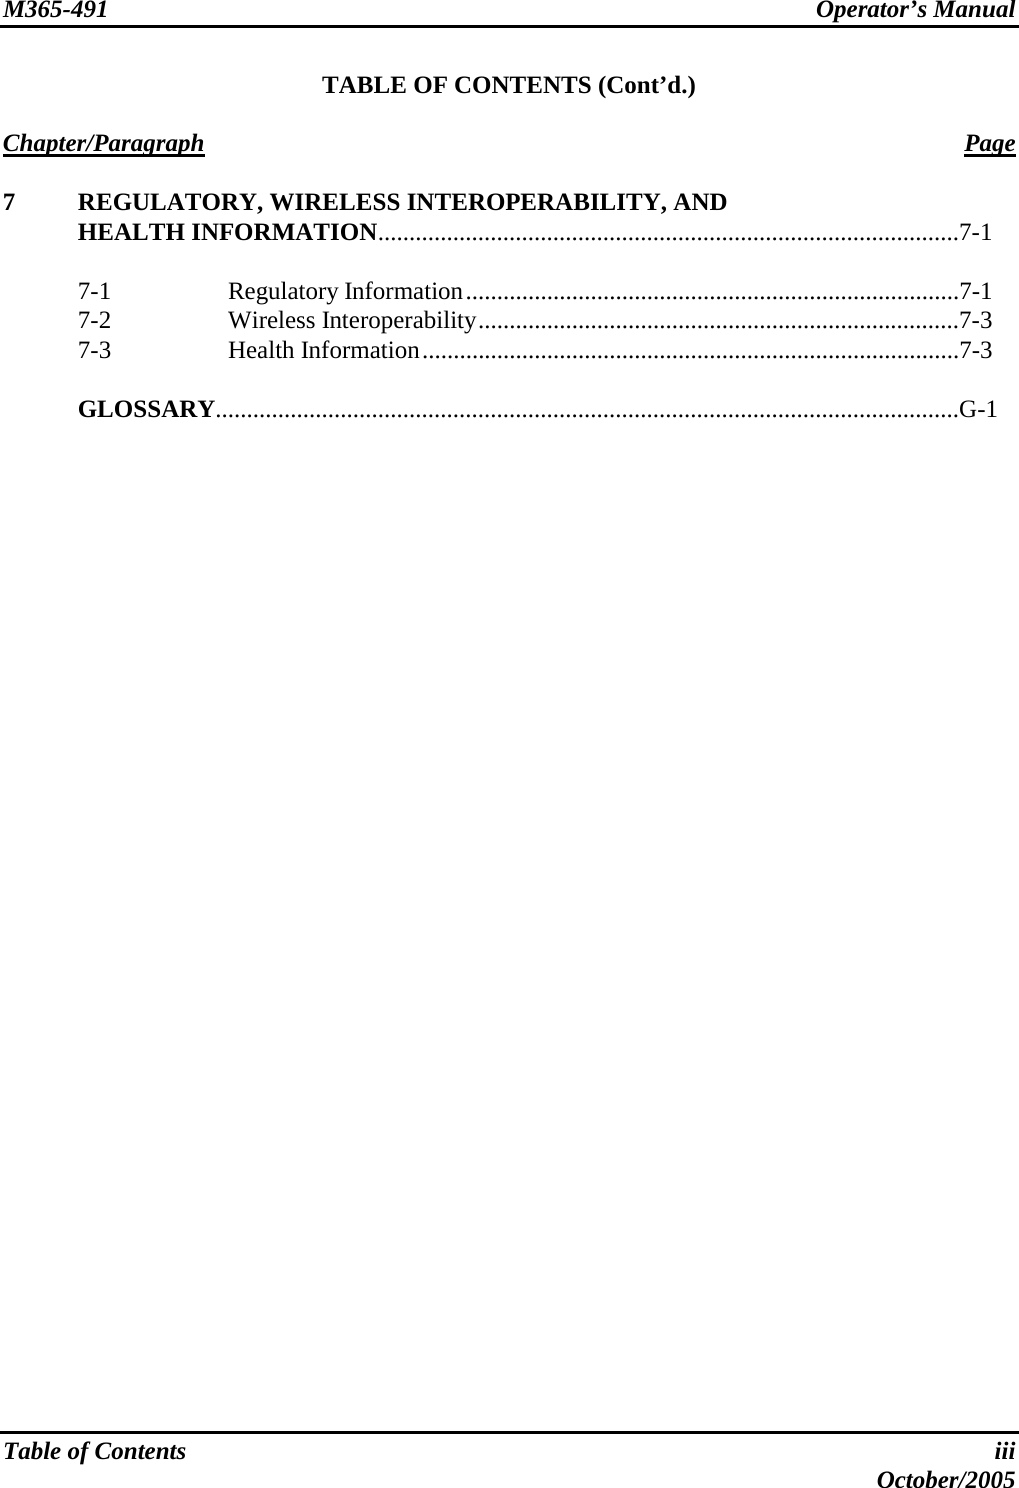 M365-491 Operator’s Manual   Table of Contents  iii  October/2005 TABLE OF CONTENTS (Cont’d.)  Chapter/Paragraph Page  7  REGULATORY, WIRELESS INTEROPERABILITY, AND  HEALTH INFORMATION.............................................................................................7-1   7-1  Regulatory Information...............................................................................7-1  7-2  Wireless Interoperability.............................................................................7-3  7-3  Health Information......................................................................................7-3   GLOSSARY.......................................................................................................................G-1   